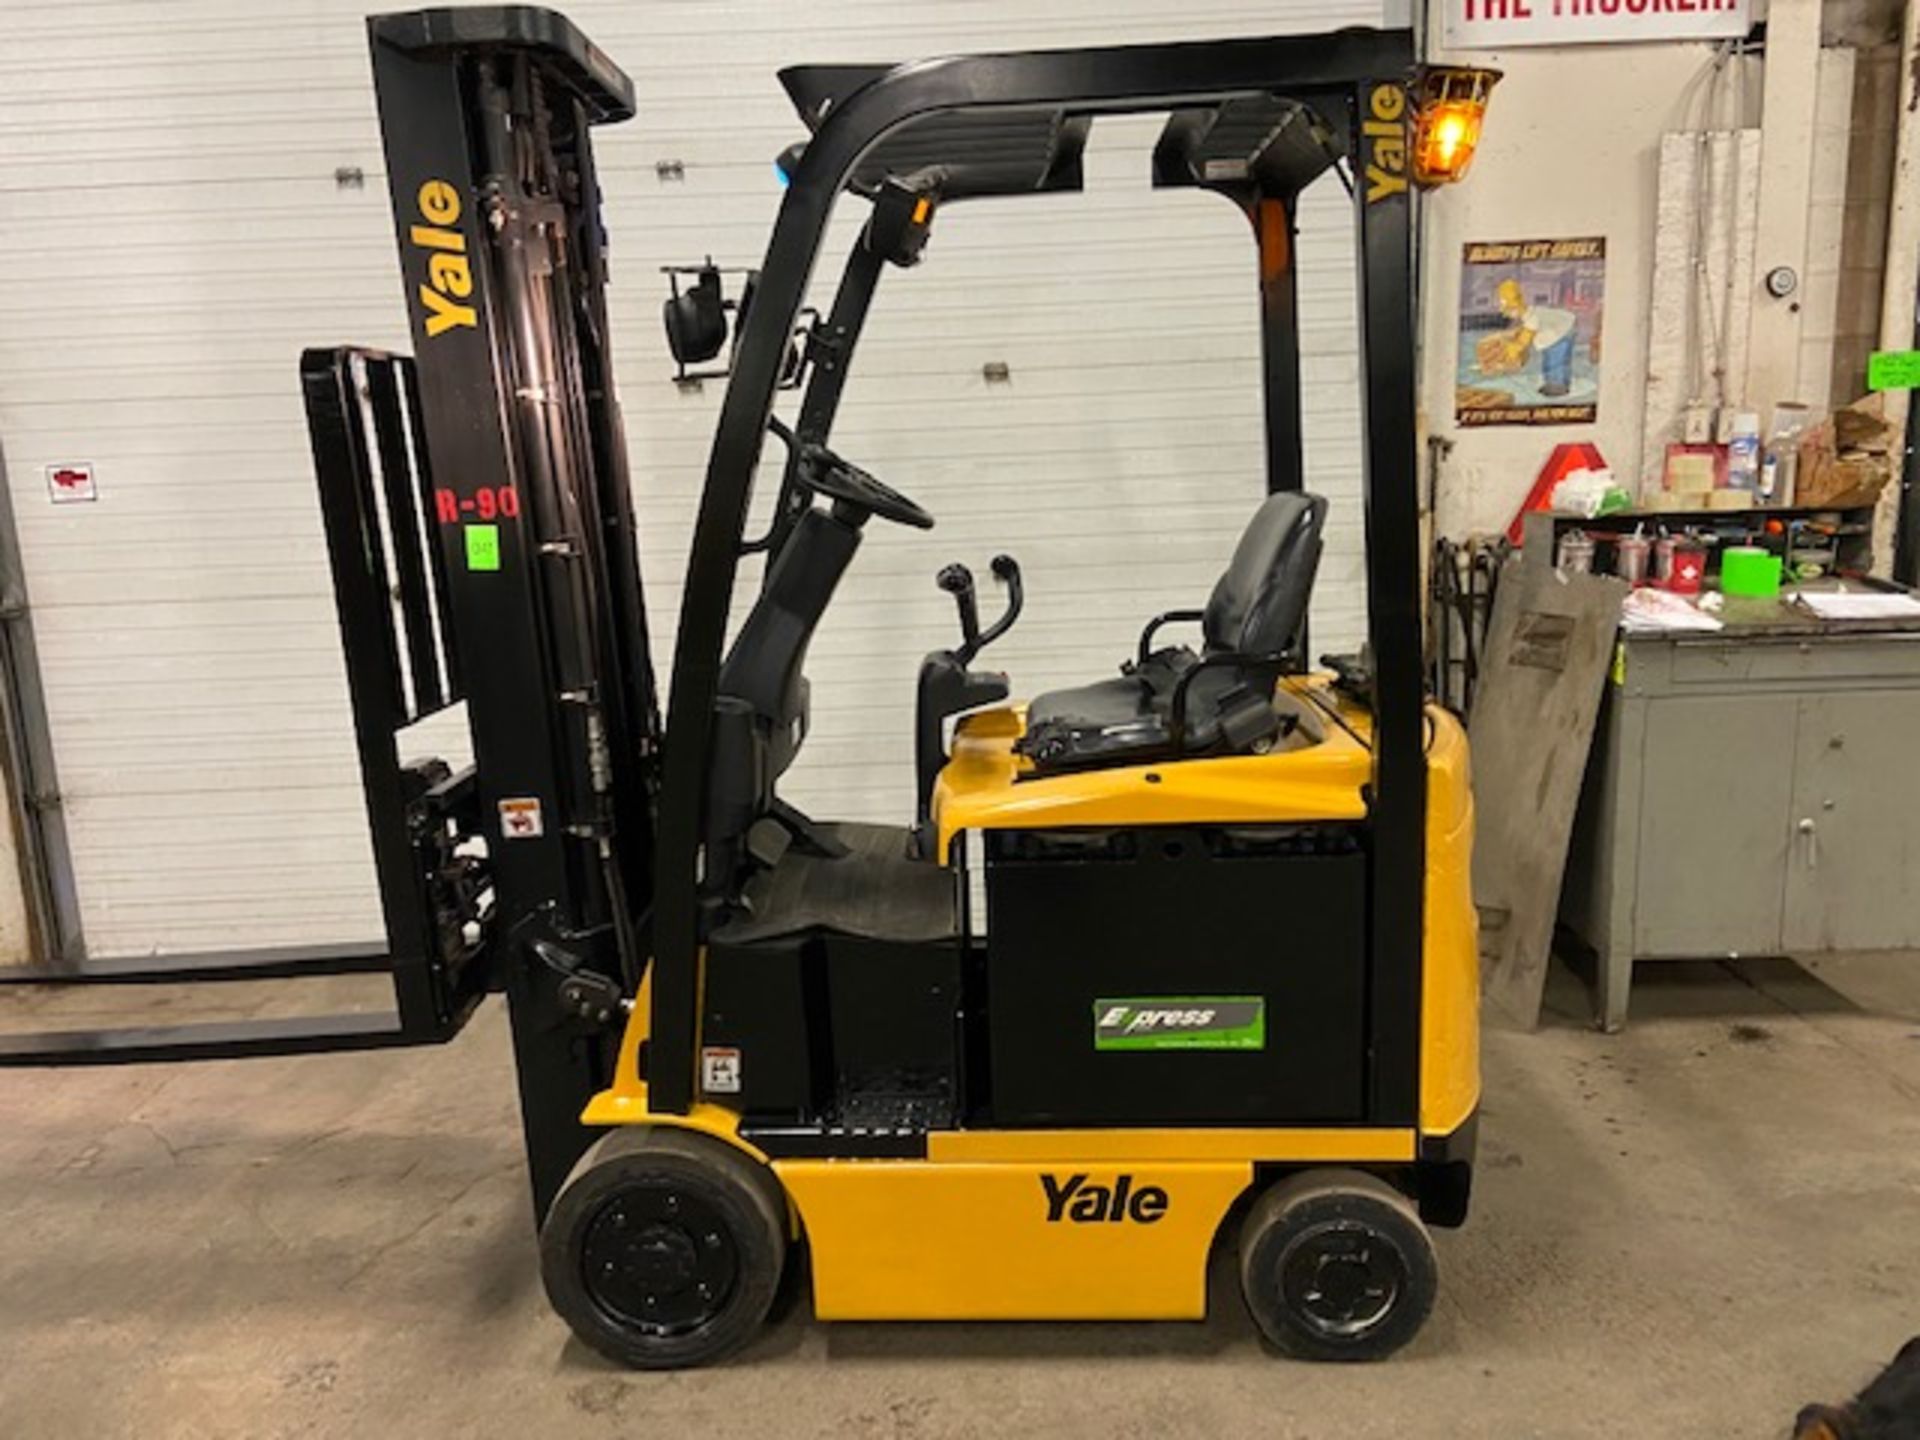 FREE CUSTOMS - 2014 Yale 3500lbs Capacity Forklift Electric with 3-STAGE MAST with sideshift